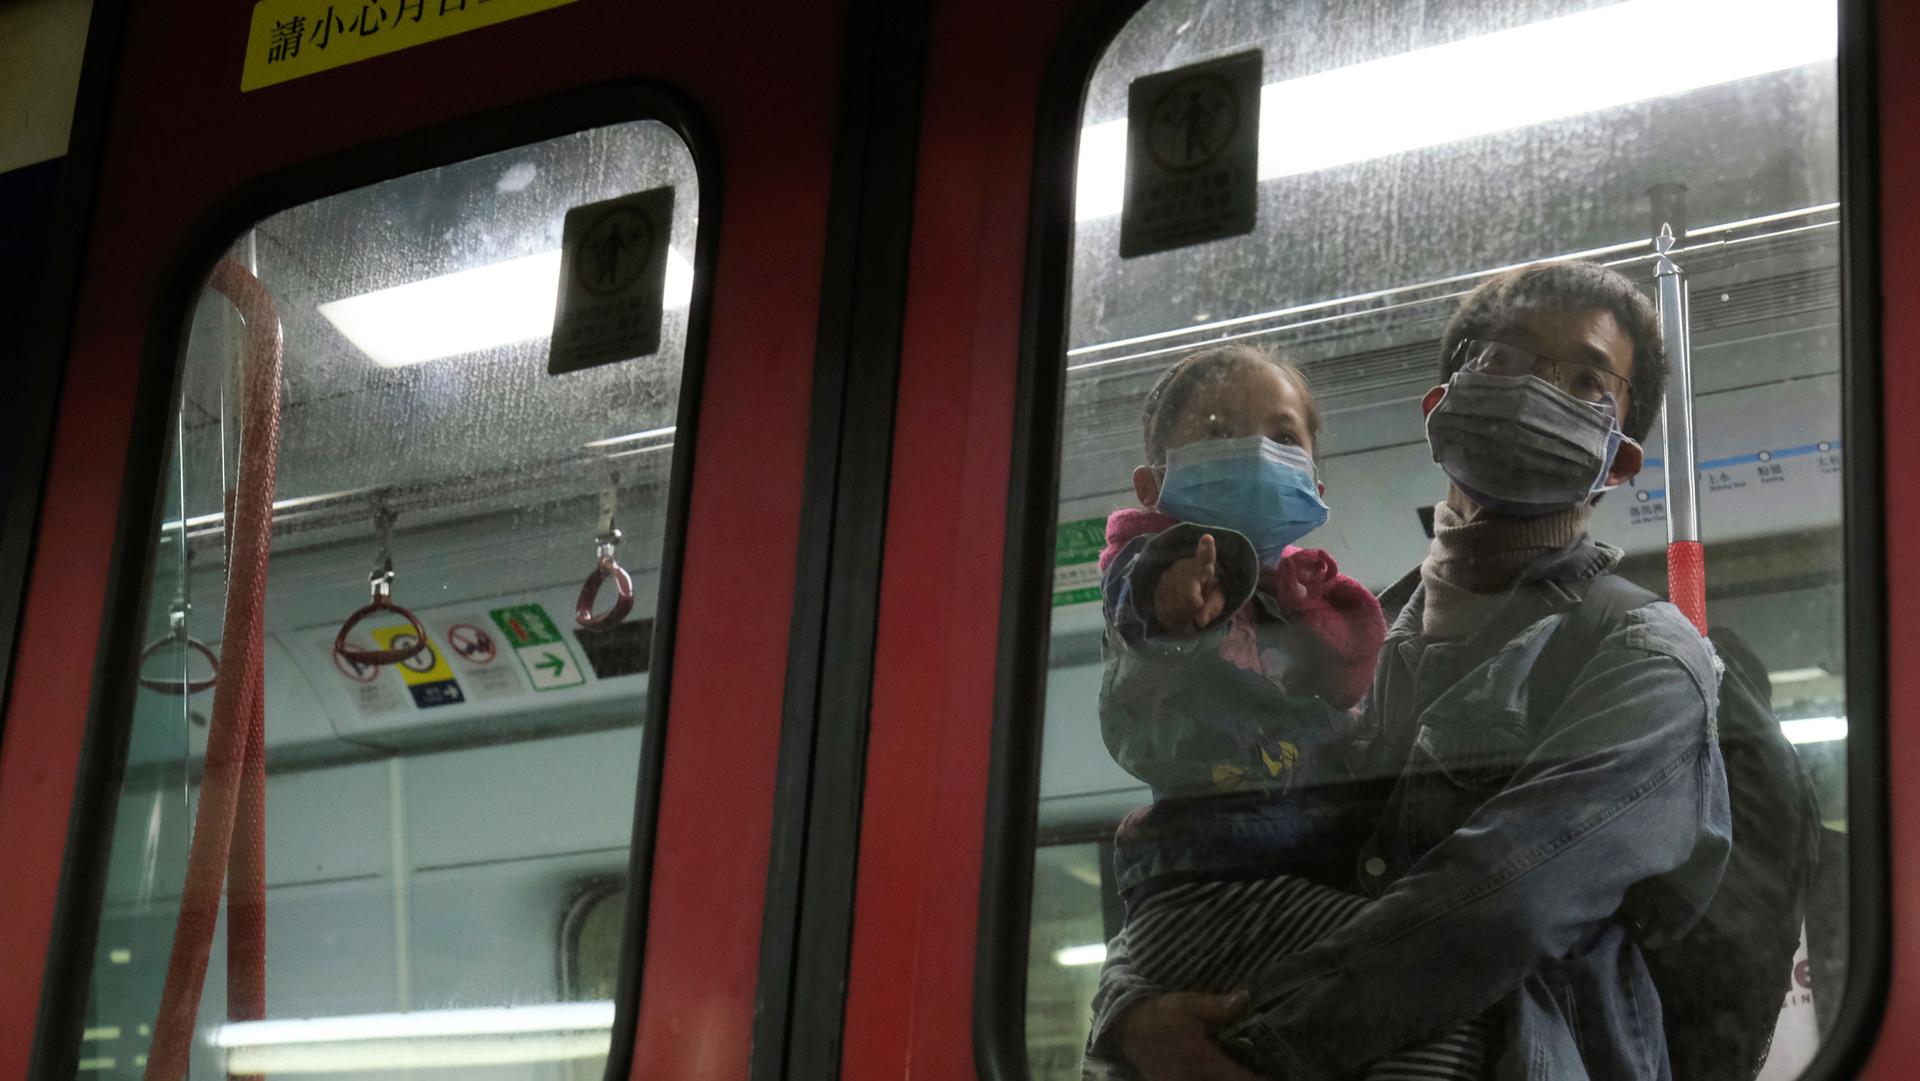 A man is shown holding a child, both wearing face masks, and shown through the window of a train.